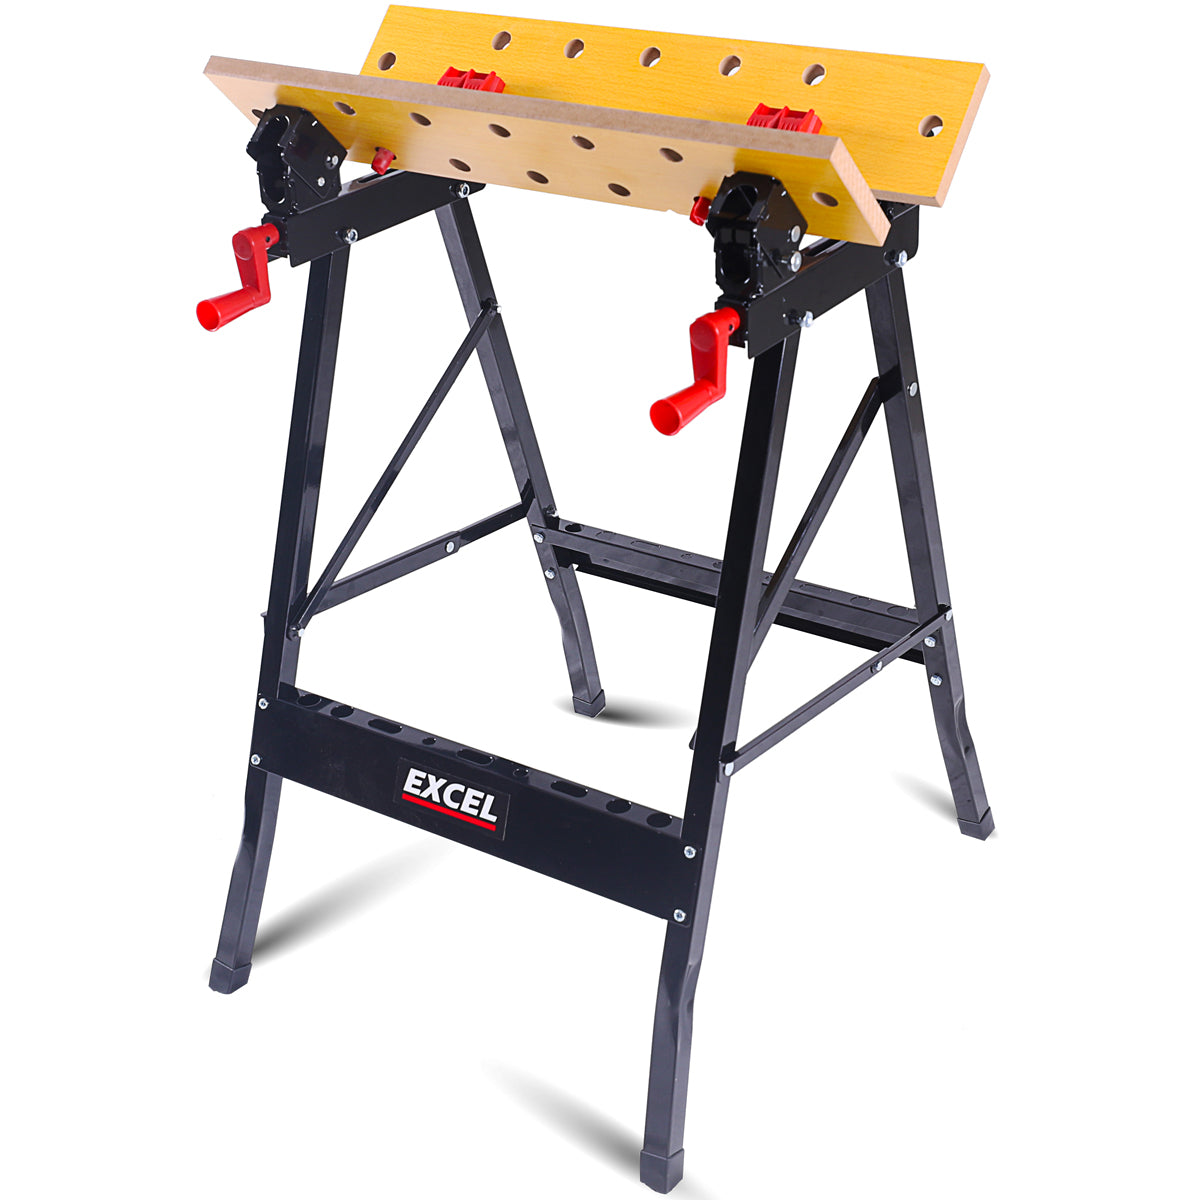 Excel Flip Top Workbench & Foldable Vise with Stand